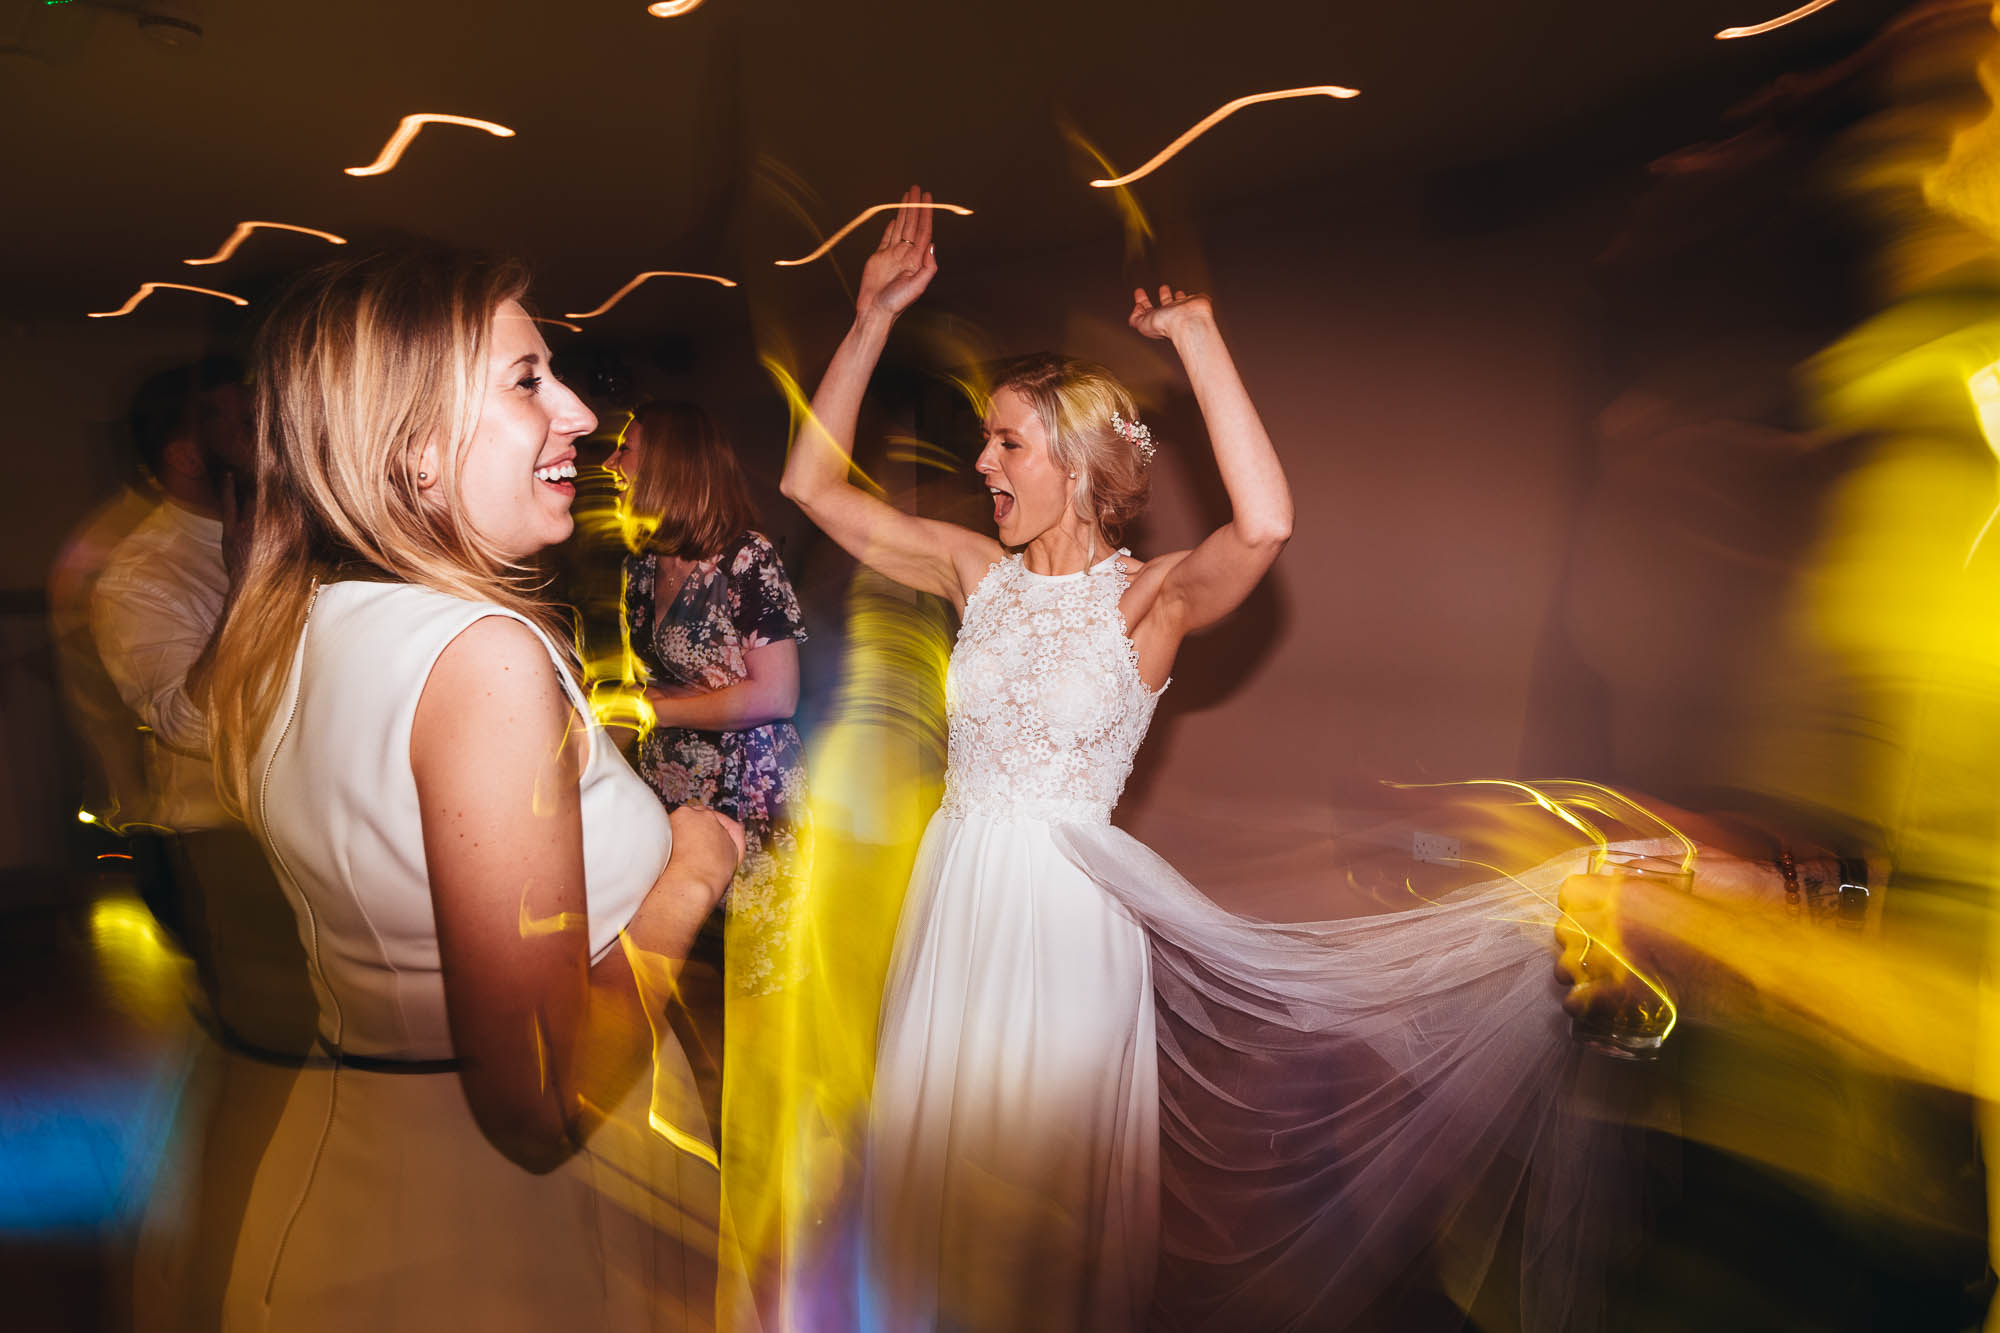 Bride raises her hands in the air and sings along on the dancefloor at wedding reception